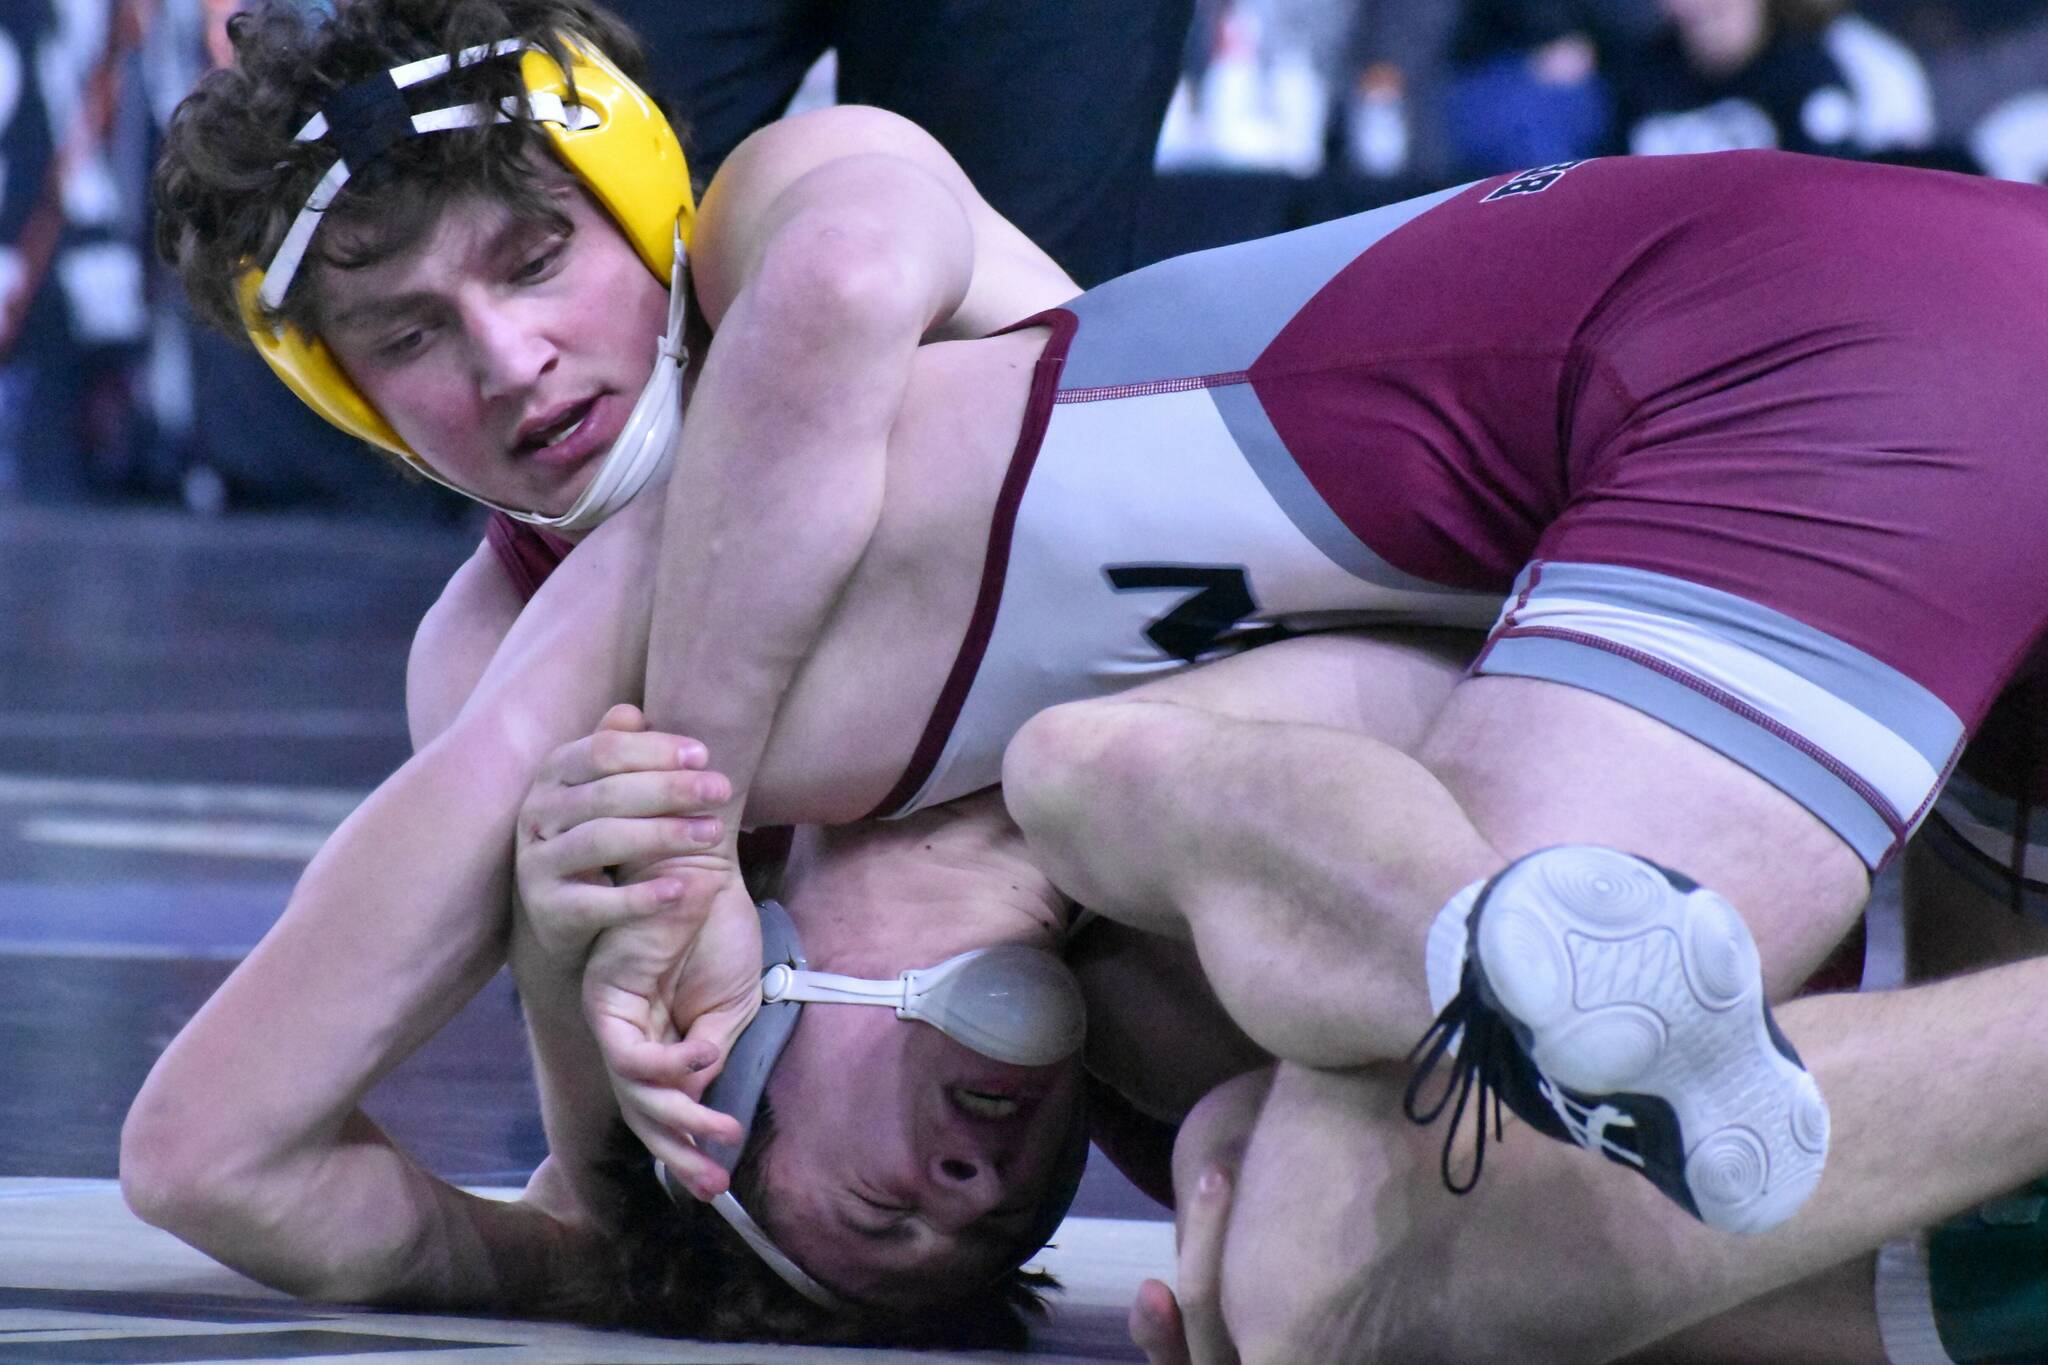 White River senior Chase Campbell battles Waylen Land of W.F. West High during an opening-round state tourney match at 182 pounds. Campbell fell in his opener but bounced back with two victories on Friday. Photo by Kevin Hanson